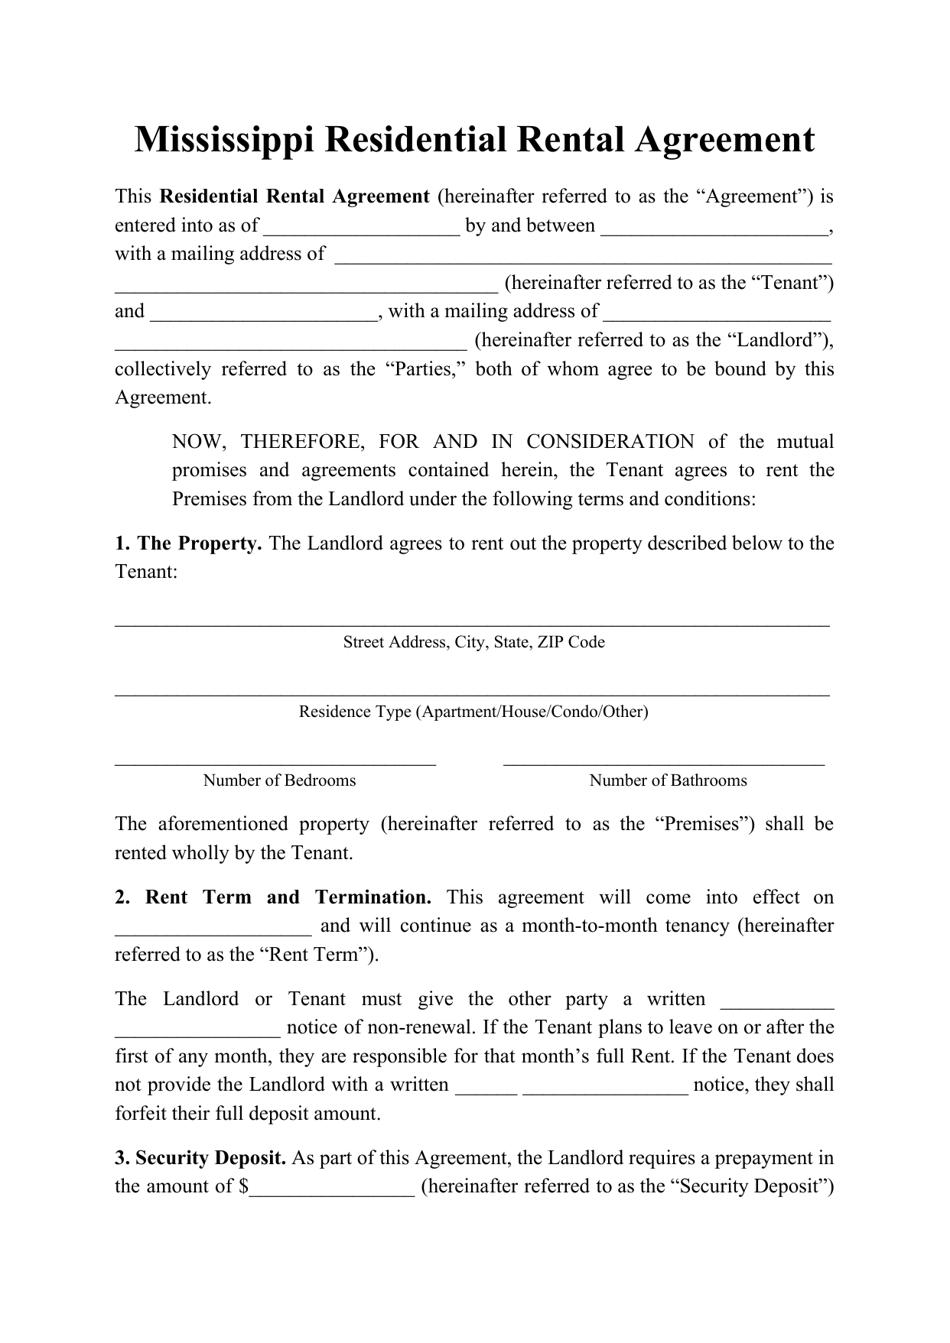 Residential Rental Agreement Template - Mississippi, Page 1